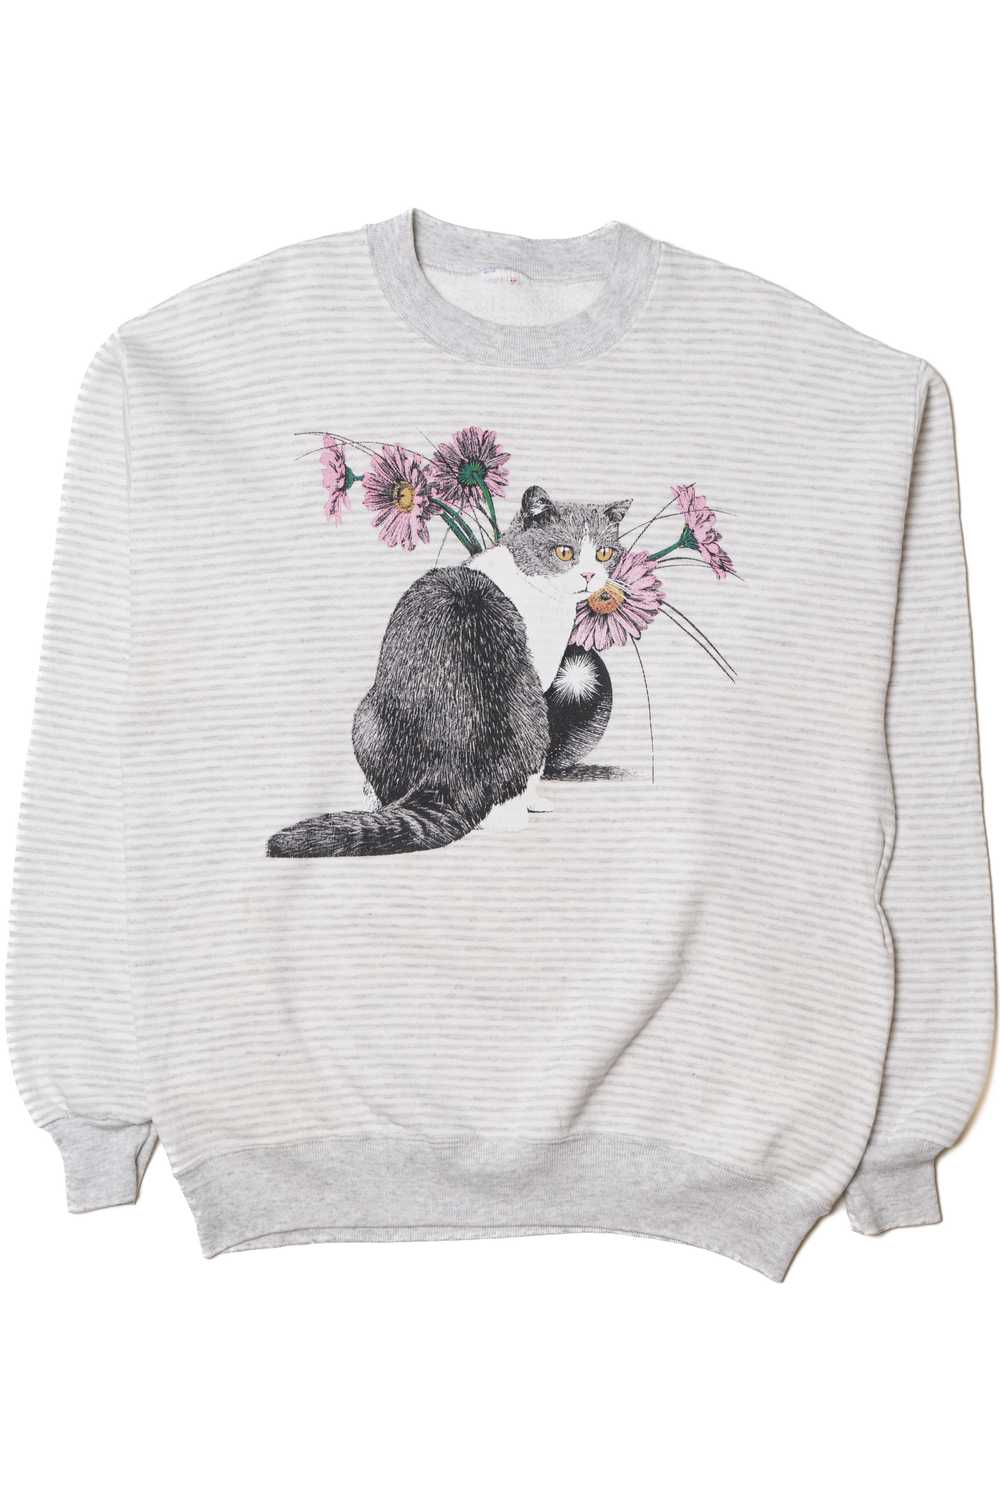 Vintage Cat With Flowers Thin Striped Sweatshirt - image 1